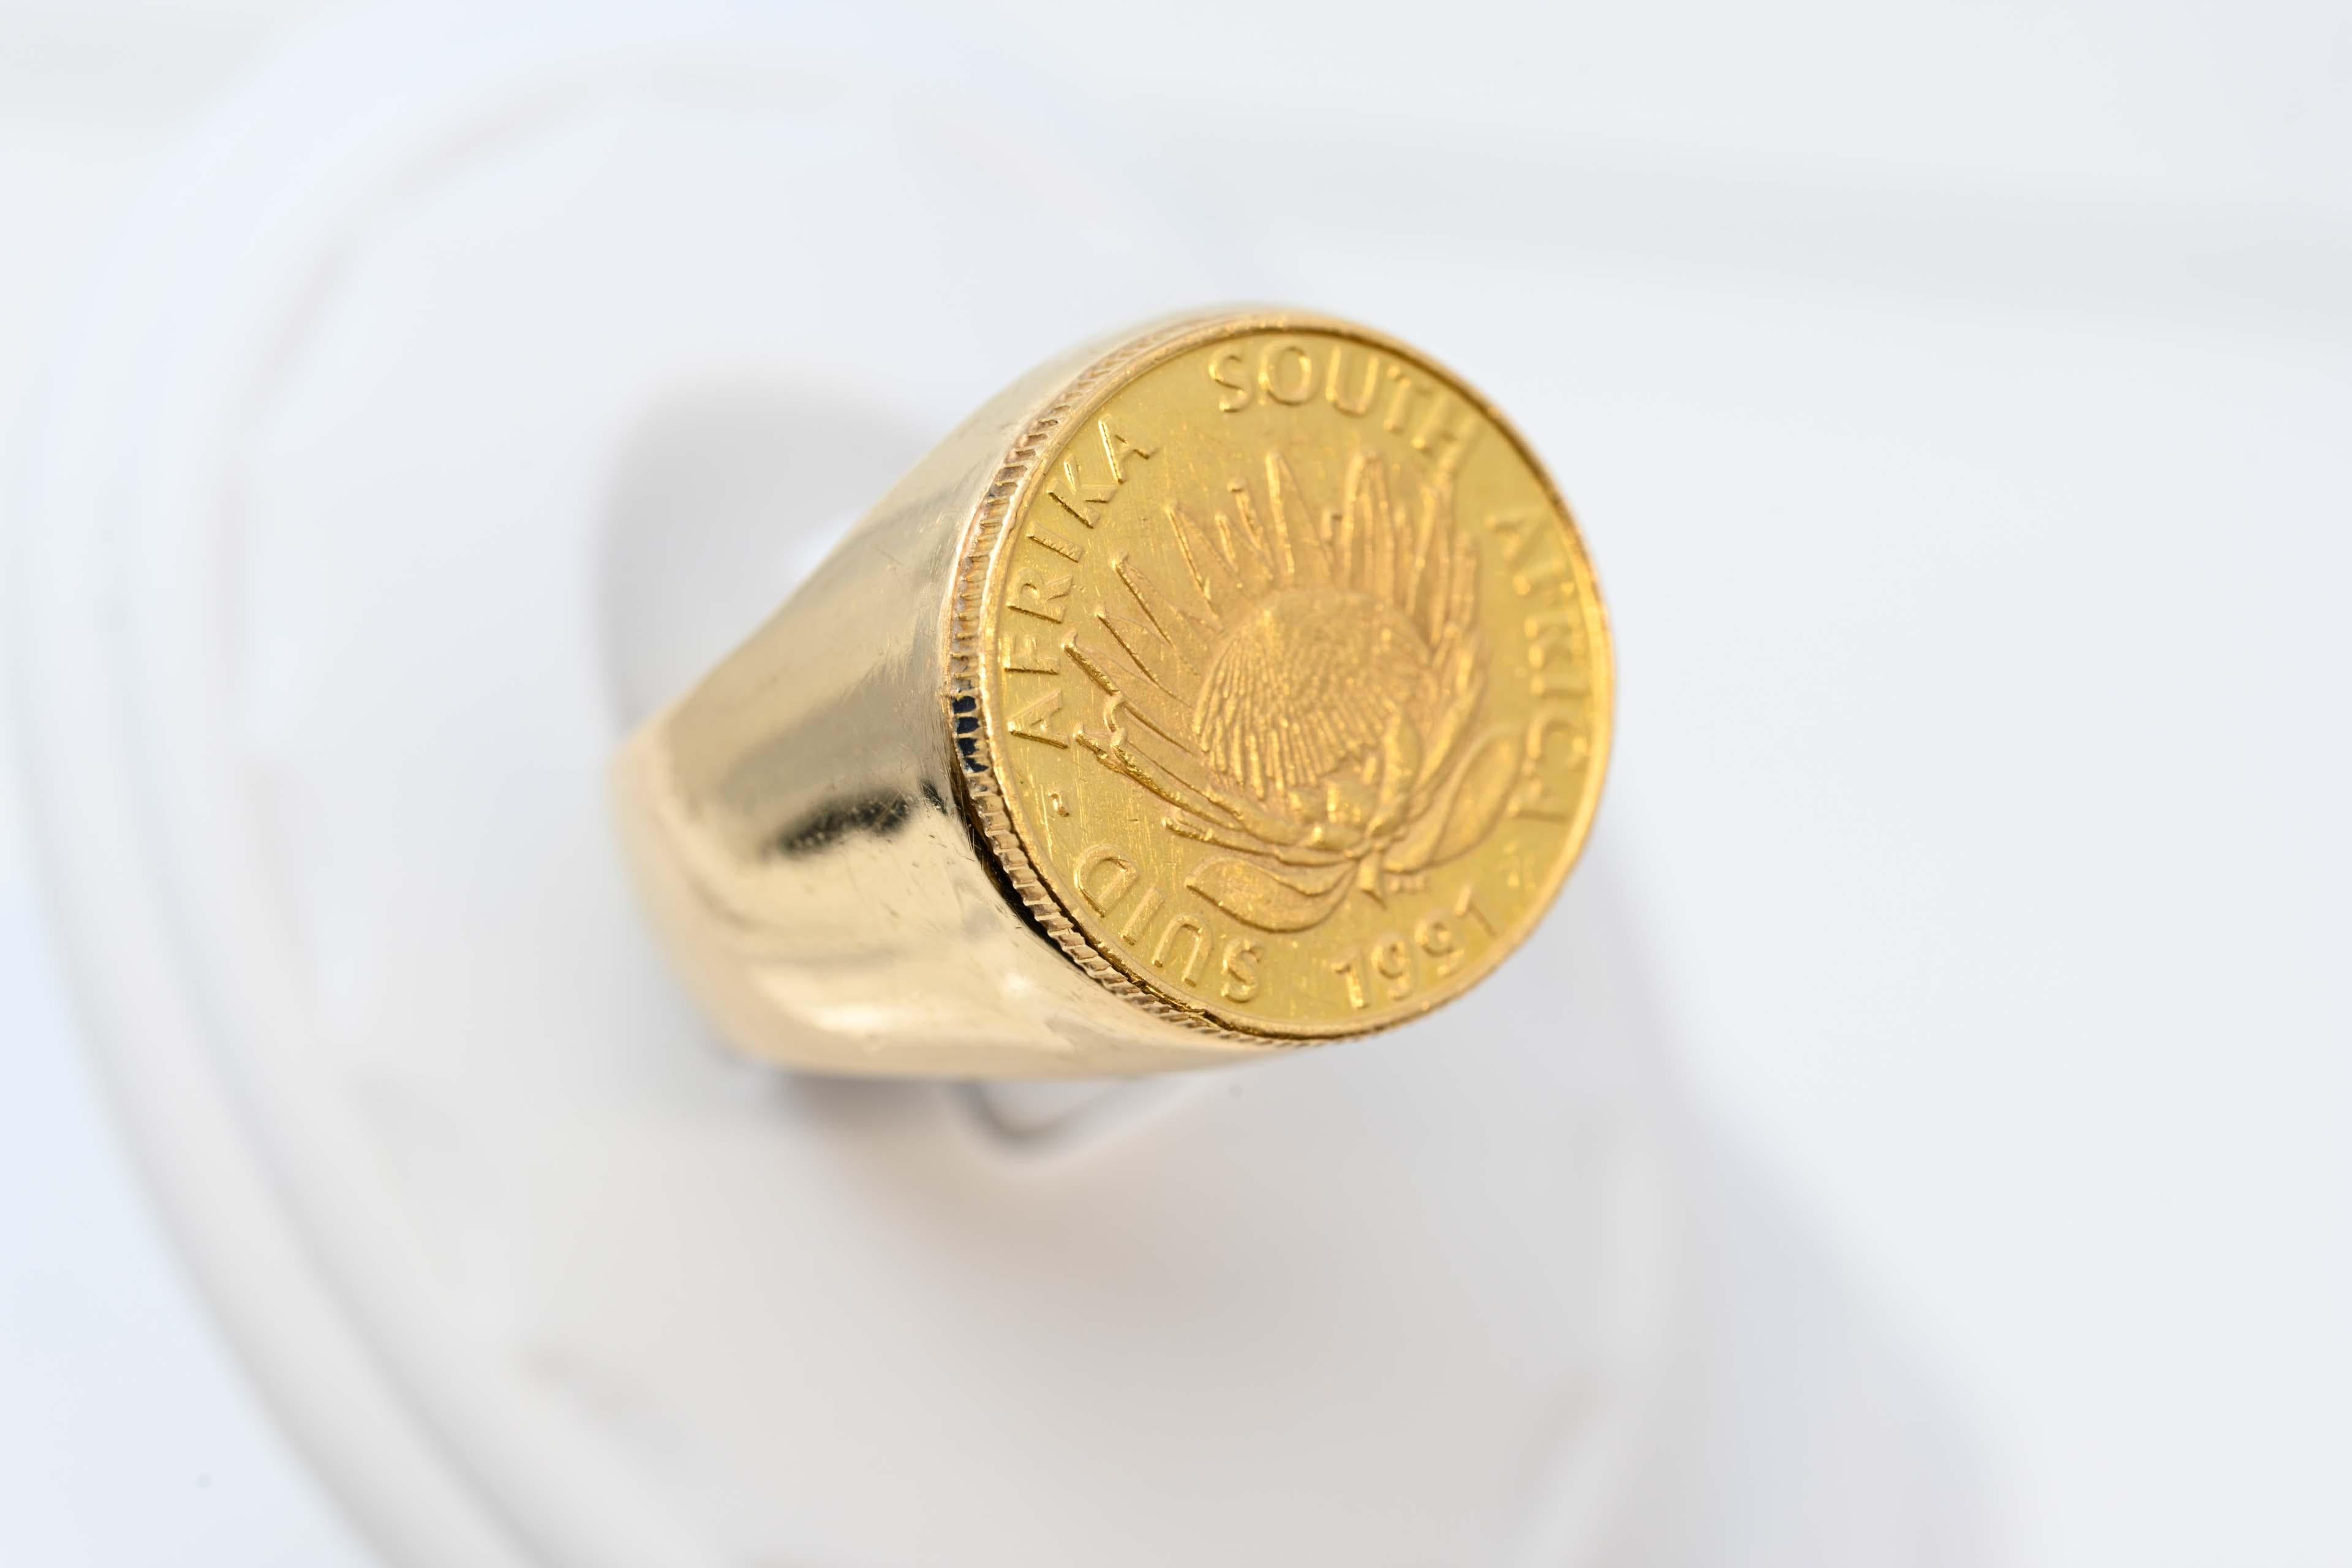 14k Gold ring with South Africa gold coin 1891-1991 1/10 oz fine gold Verpleging Protean Nursing, diameter of coin 16.5mm. Ring size 7 3/4, late 20th century. South Africa , total weight 13.4 grams. In good condition.